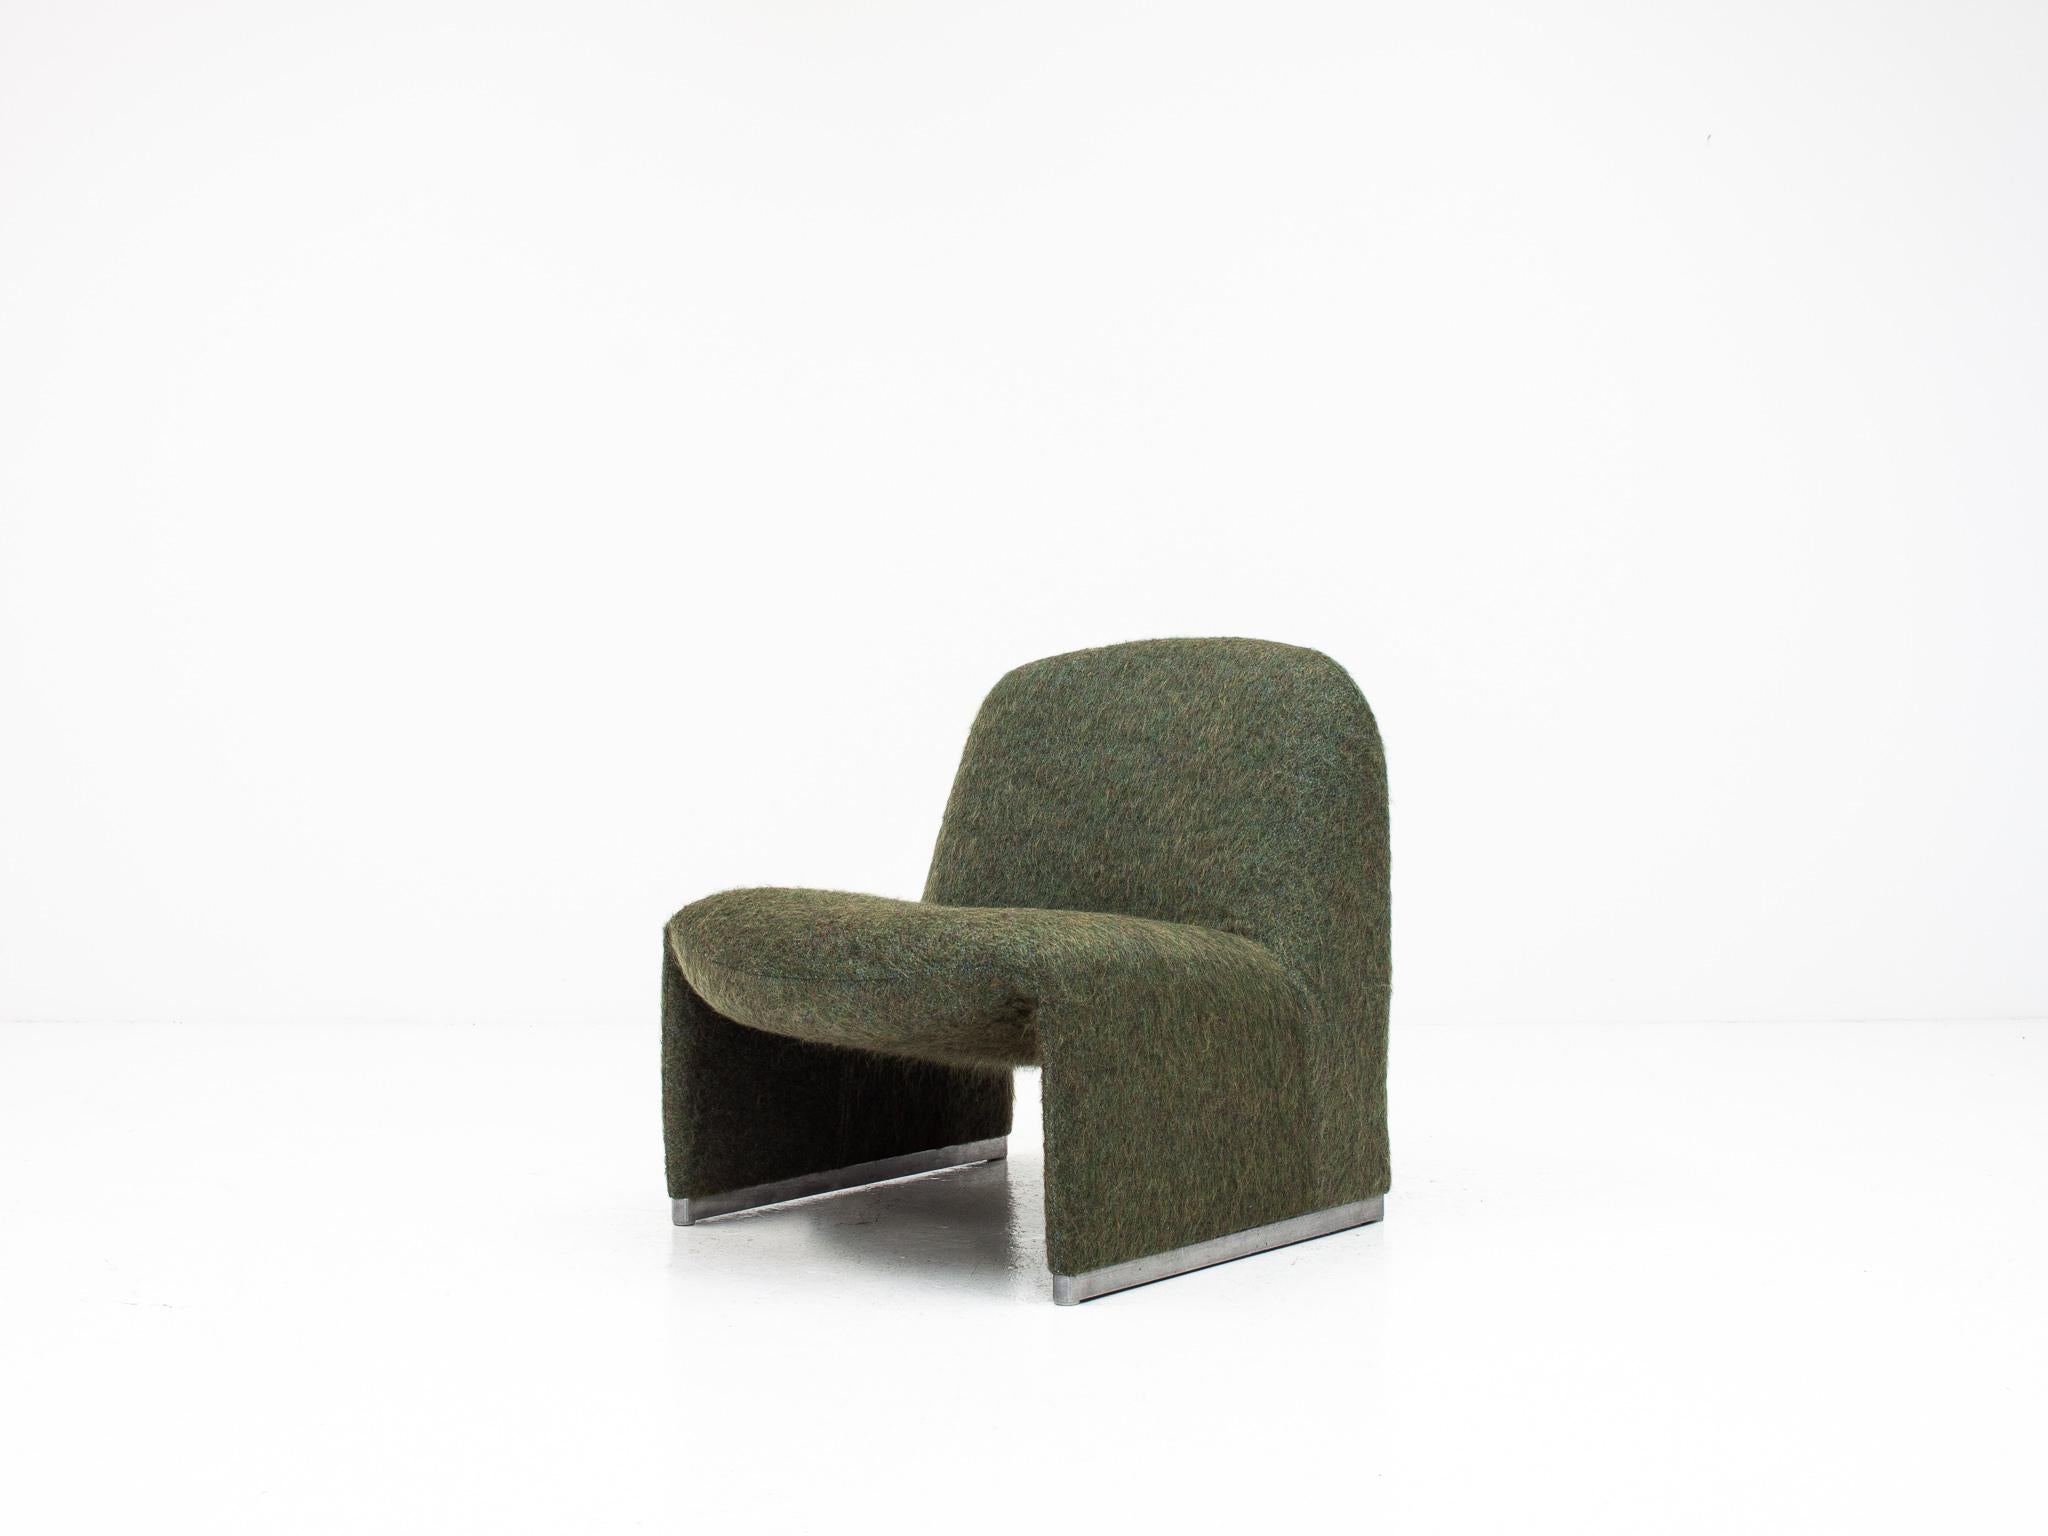 A Giancarlo Piretti “Alky” chair newly upholstered in fluffy Pierre Frey fabric.

Manufactured by Artifort in the 1970s in the Netherlands.  Newly upholstered in fluffy wool, mohair and alpaca fabric which is produced by one of the most luxurious